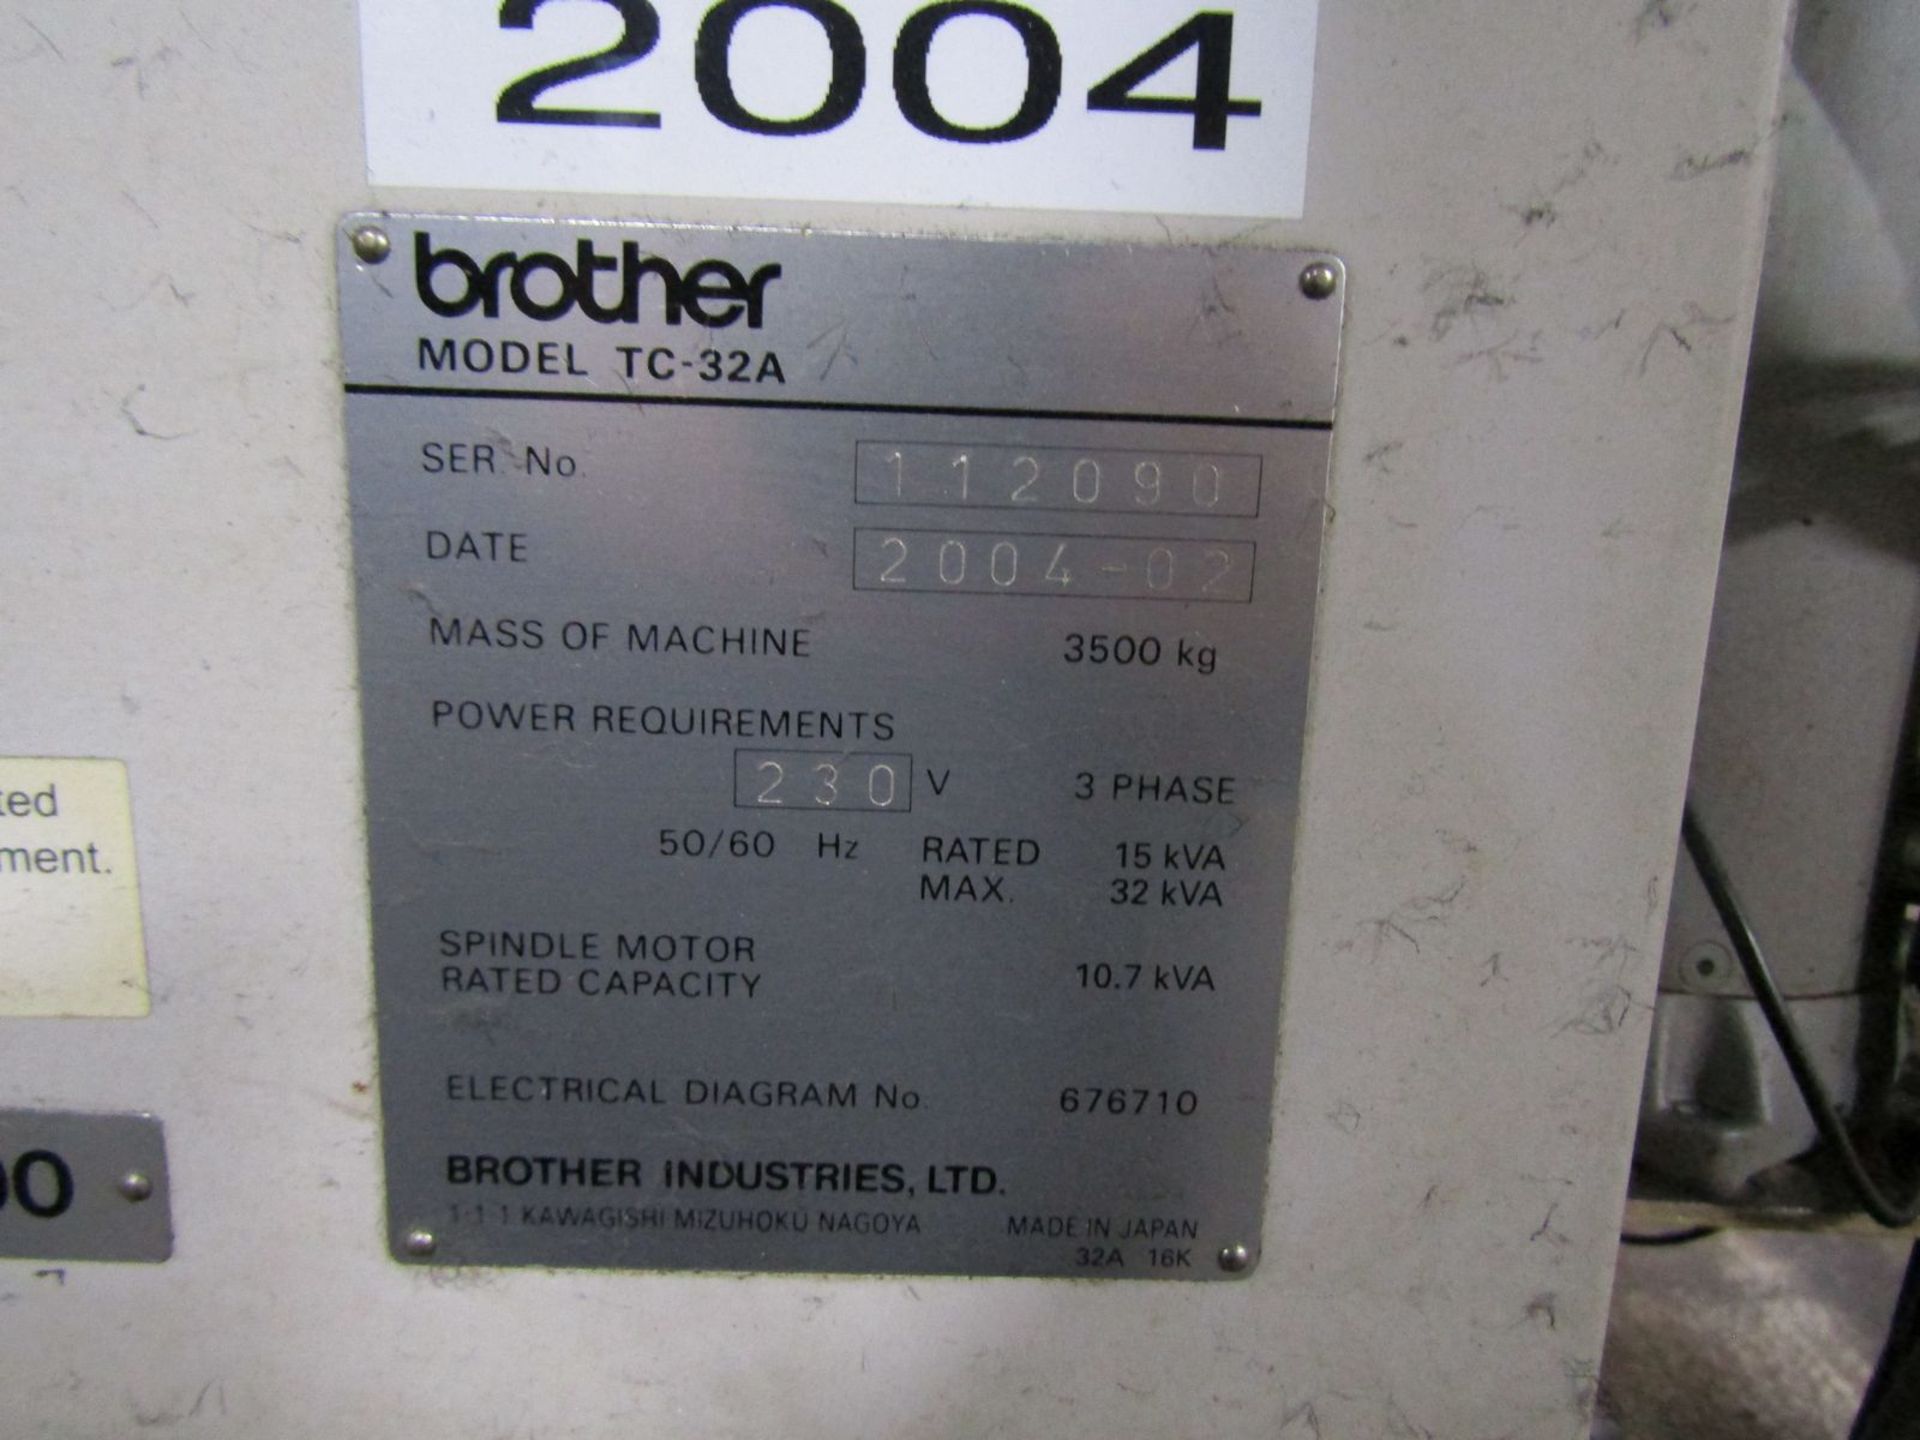 Brother Model TC-32A CNC Drilling and Tapping Center, S/N: 112090 (2004); with Brother CNC Controls - Image 10 of 10